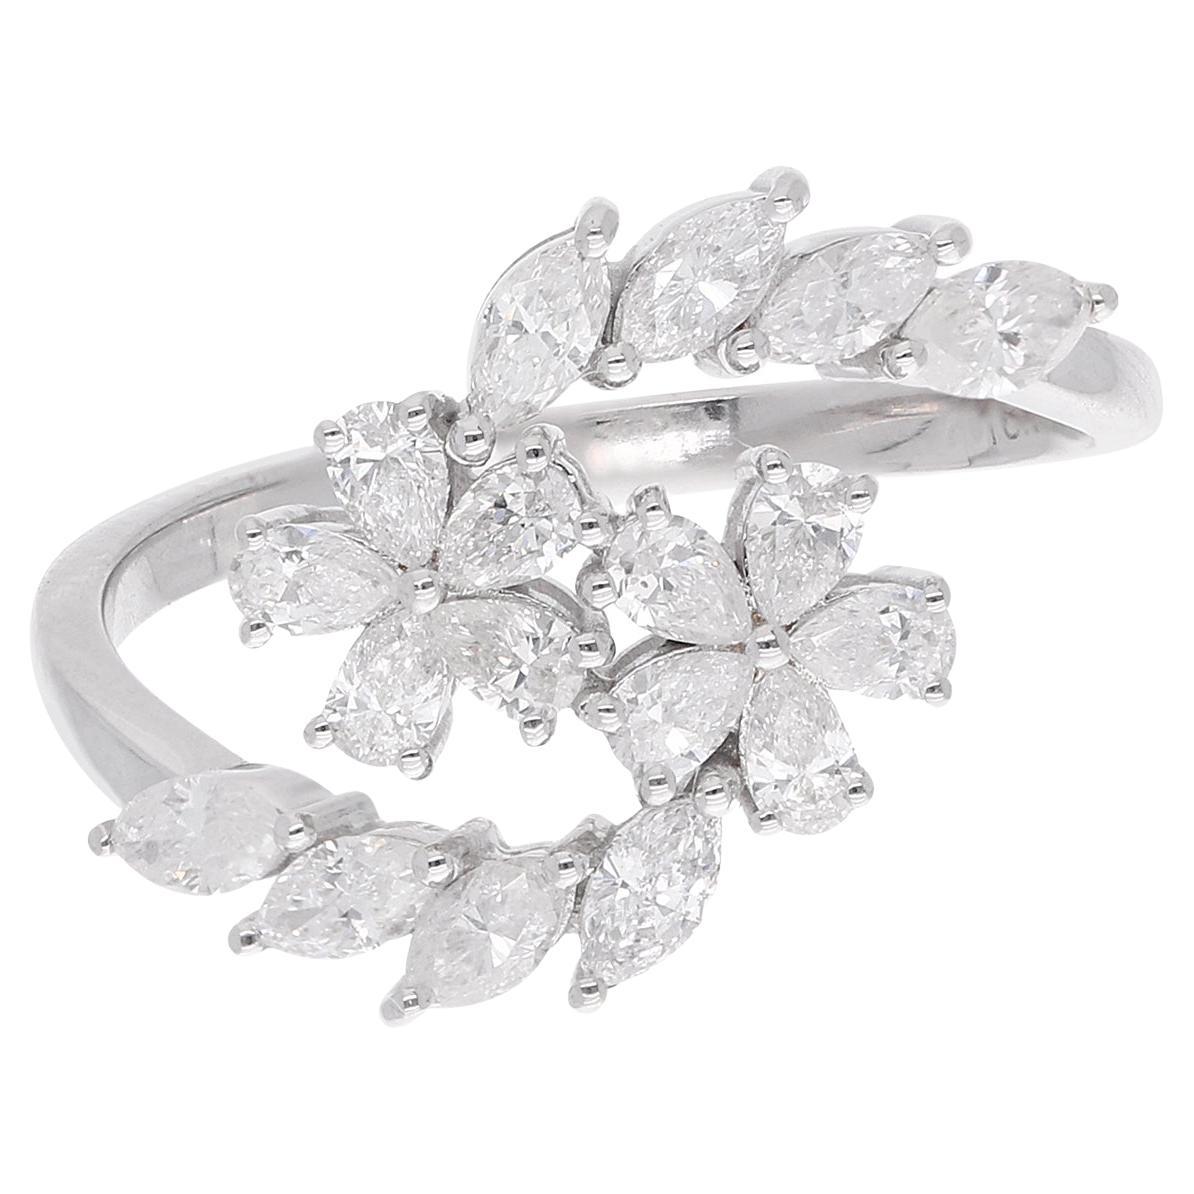 1 Carat Pear & Marquise Diamond Flower Ring 14 Karat White Gold Fine Jewelry For Sale